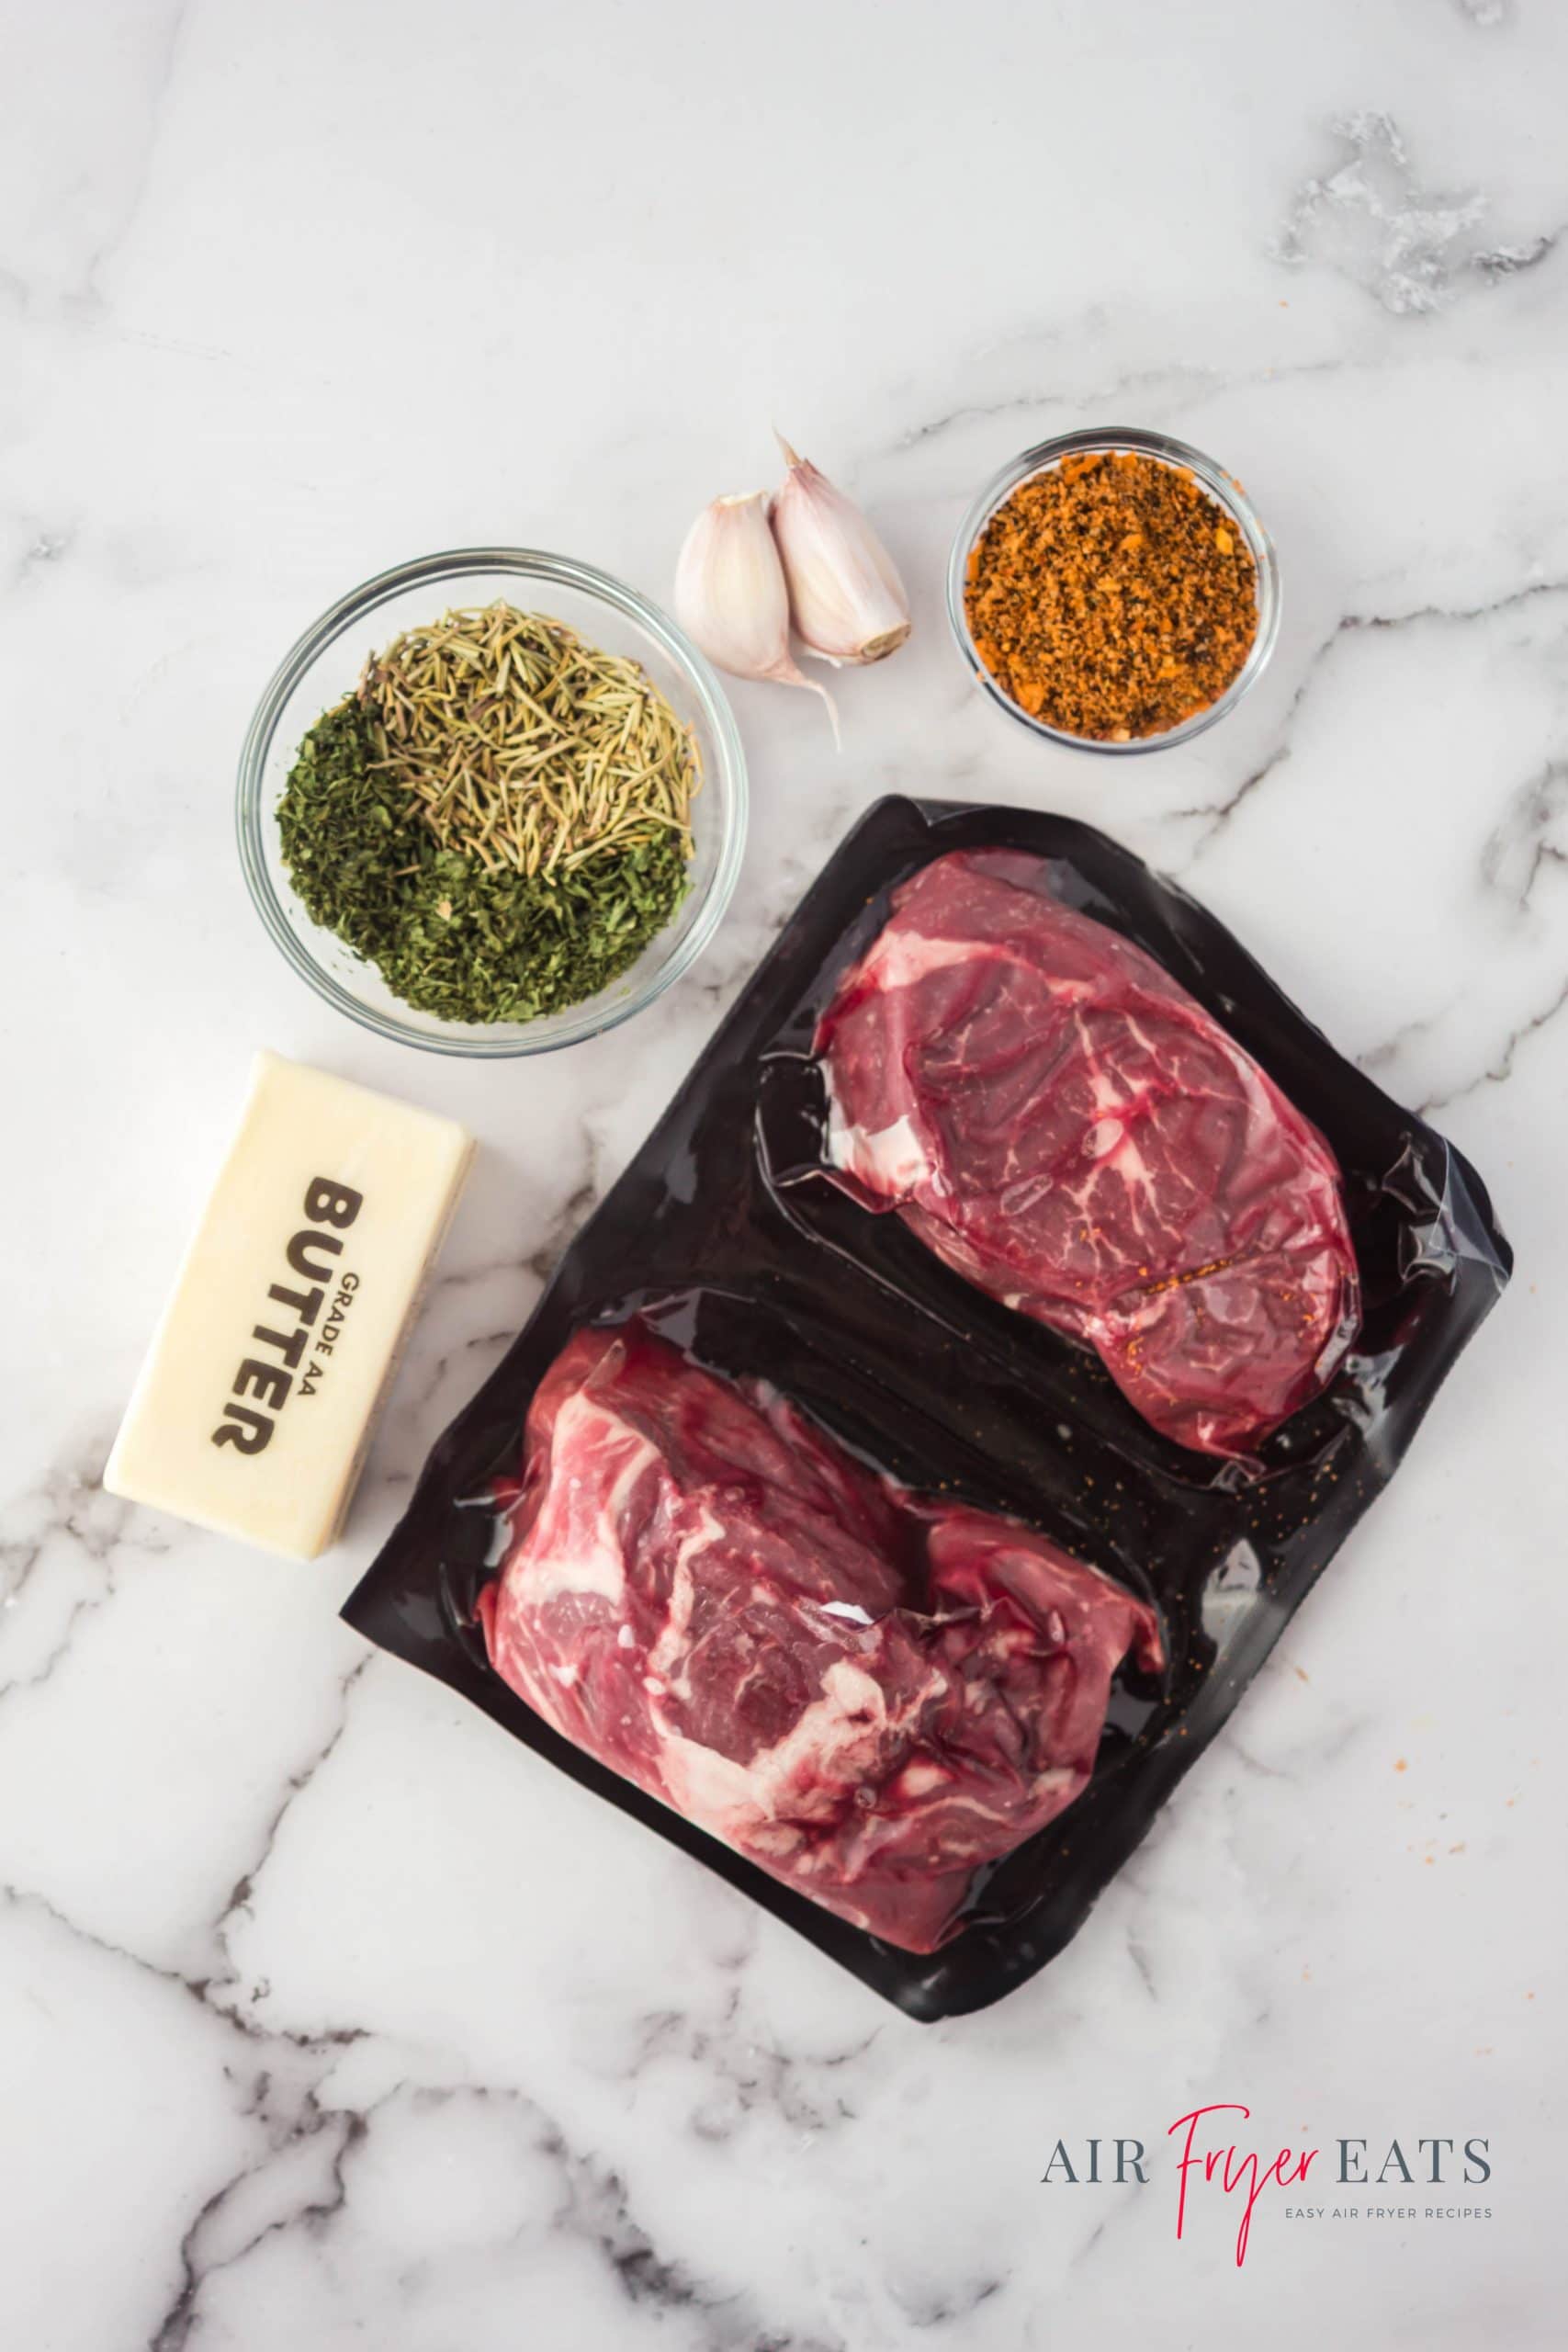 Ingredients for making air fryer steak in the ninja foodi, including herbs, garlic, butter, and thick cut steaks